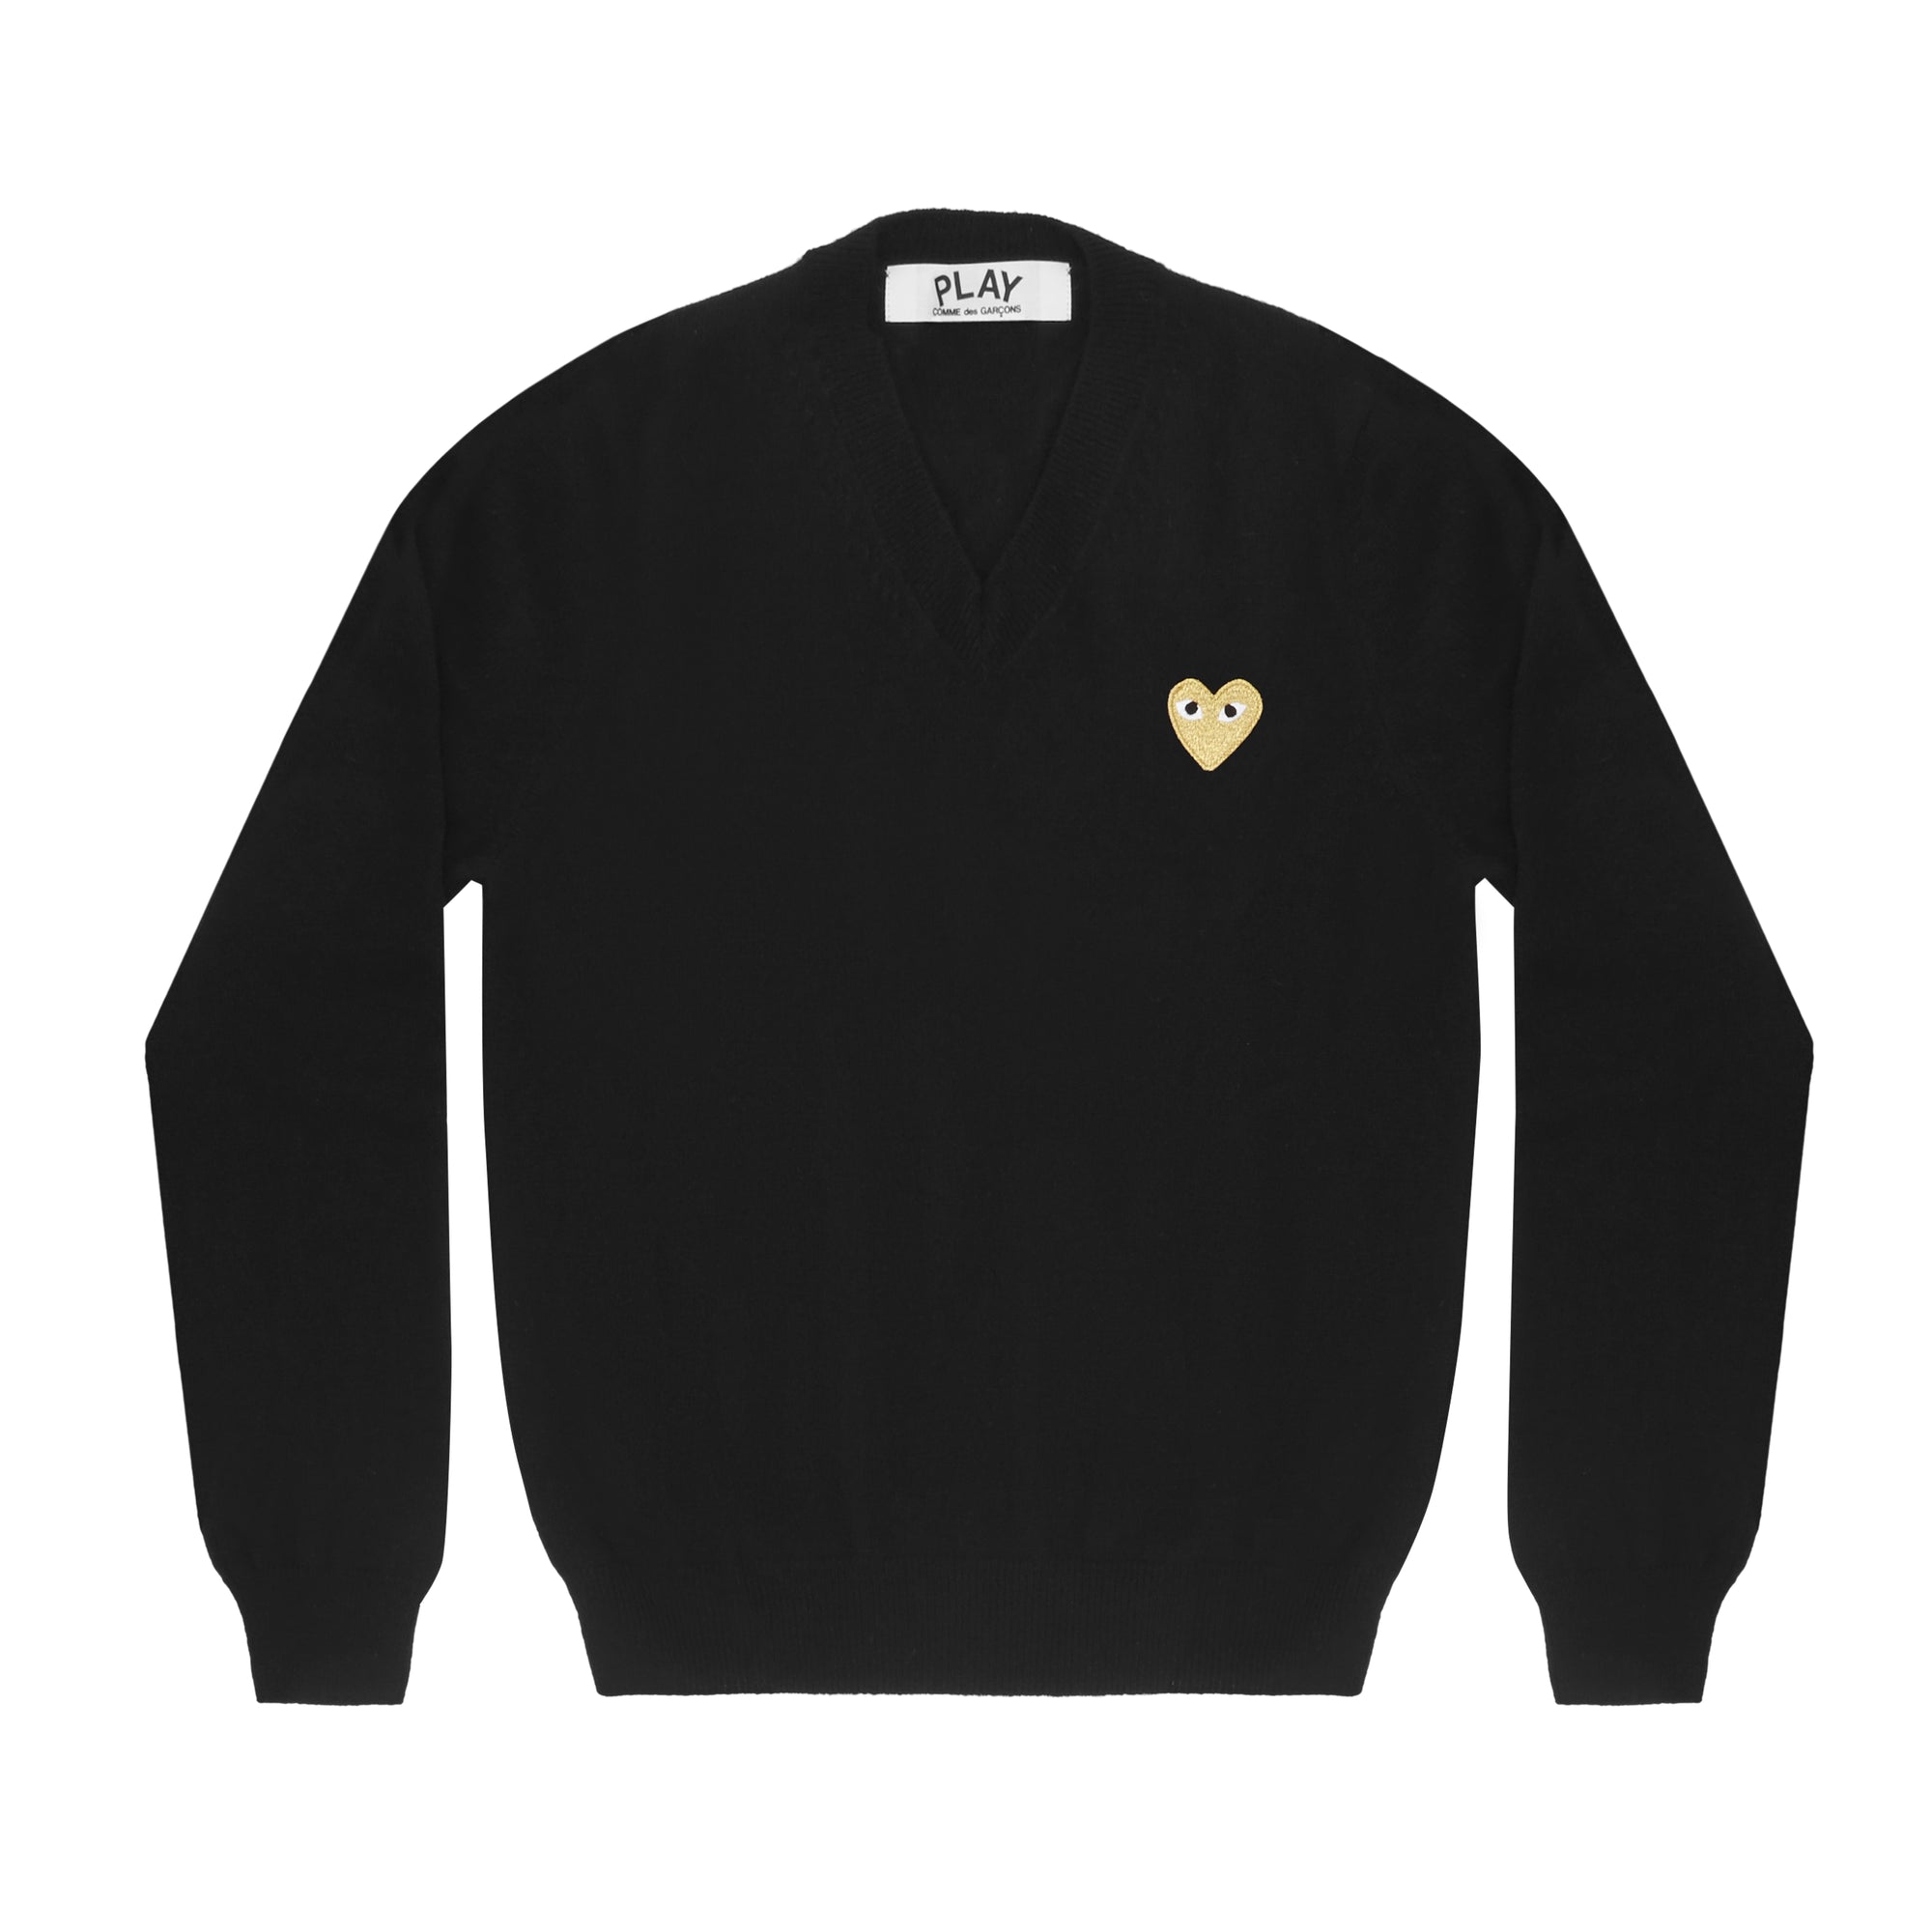 PLAY CDG - GOLD HEART V NECK SWEATER - (BLACK) view 1